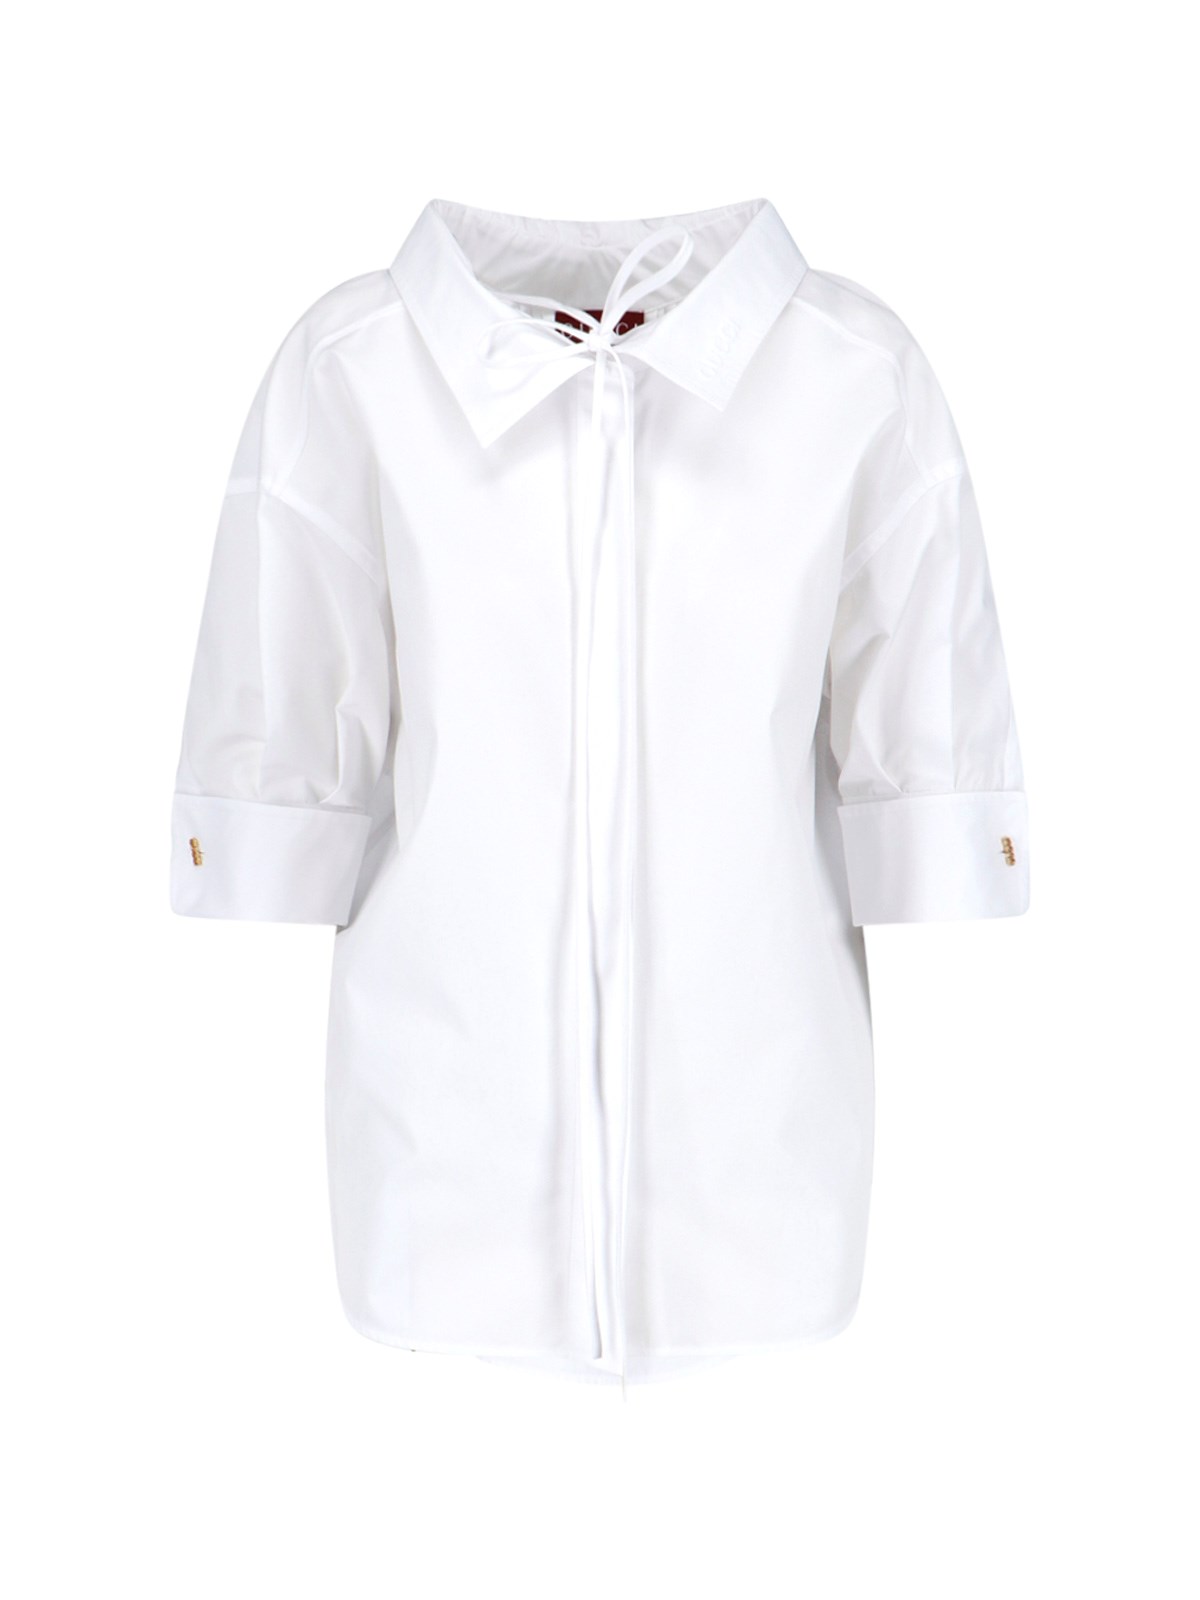 Gucci Bow Detail Shirt In White